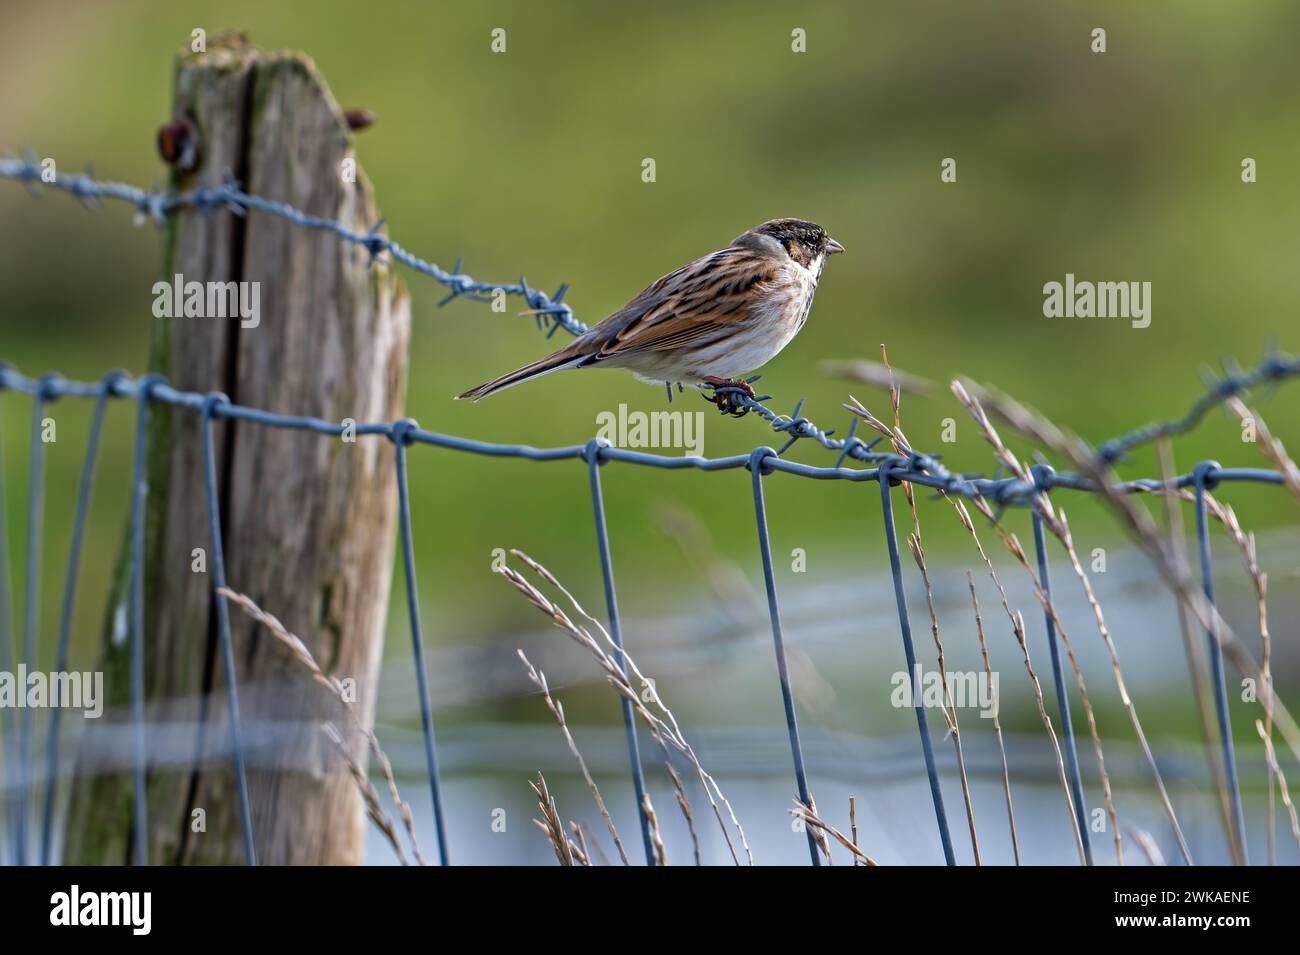 Common reed bunting (Emberiza schoeniclus) female perched on barbwire / barbed wire fence along meadow in late winter Stock Photo